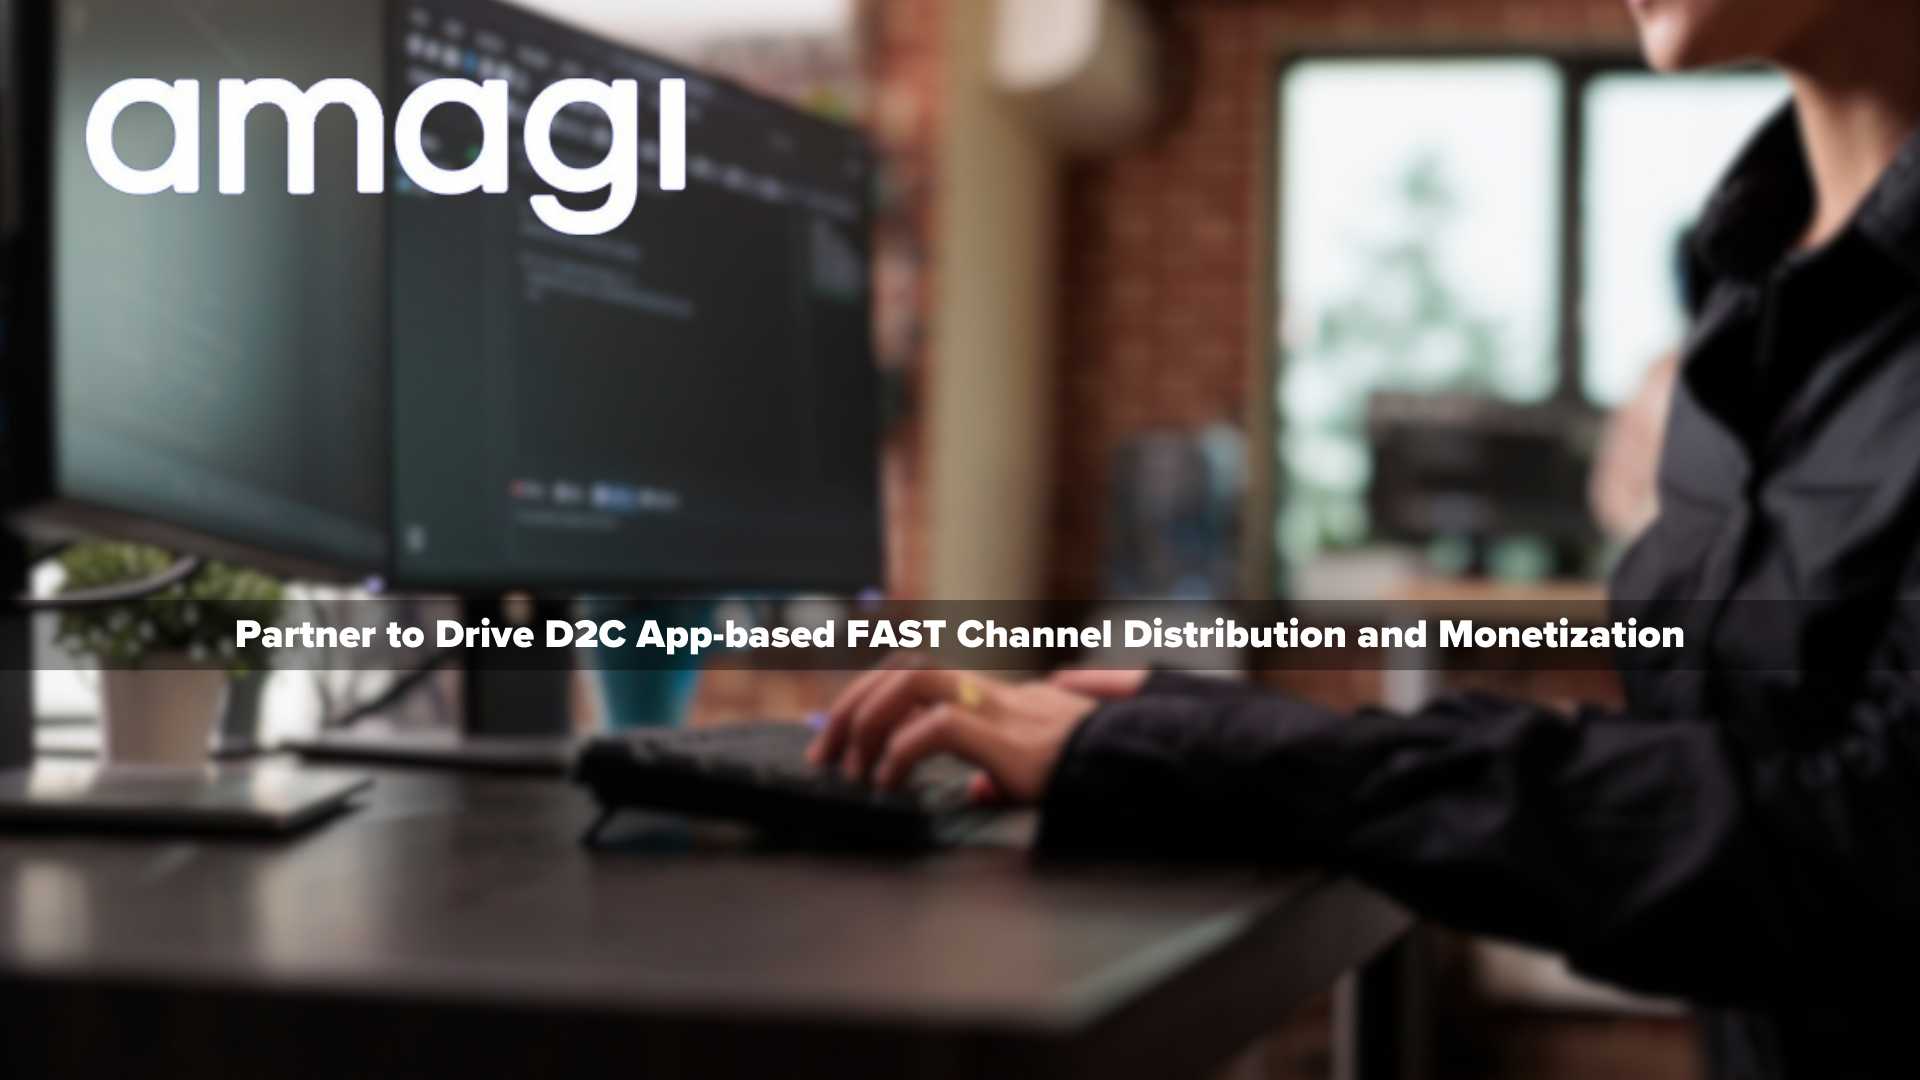 Amagi and Applicaster Partner to Drive D2C App-based FAST Channel Distribution and Monetization